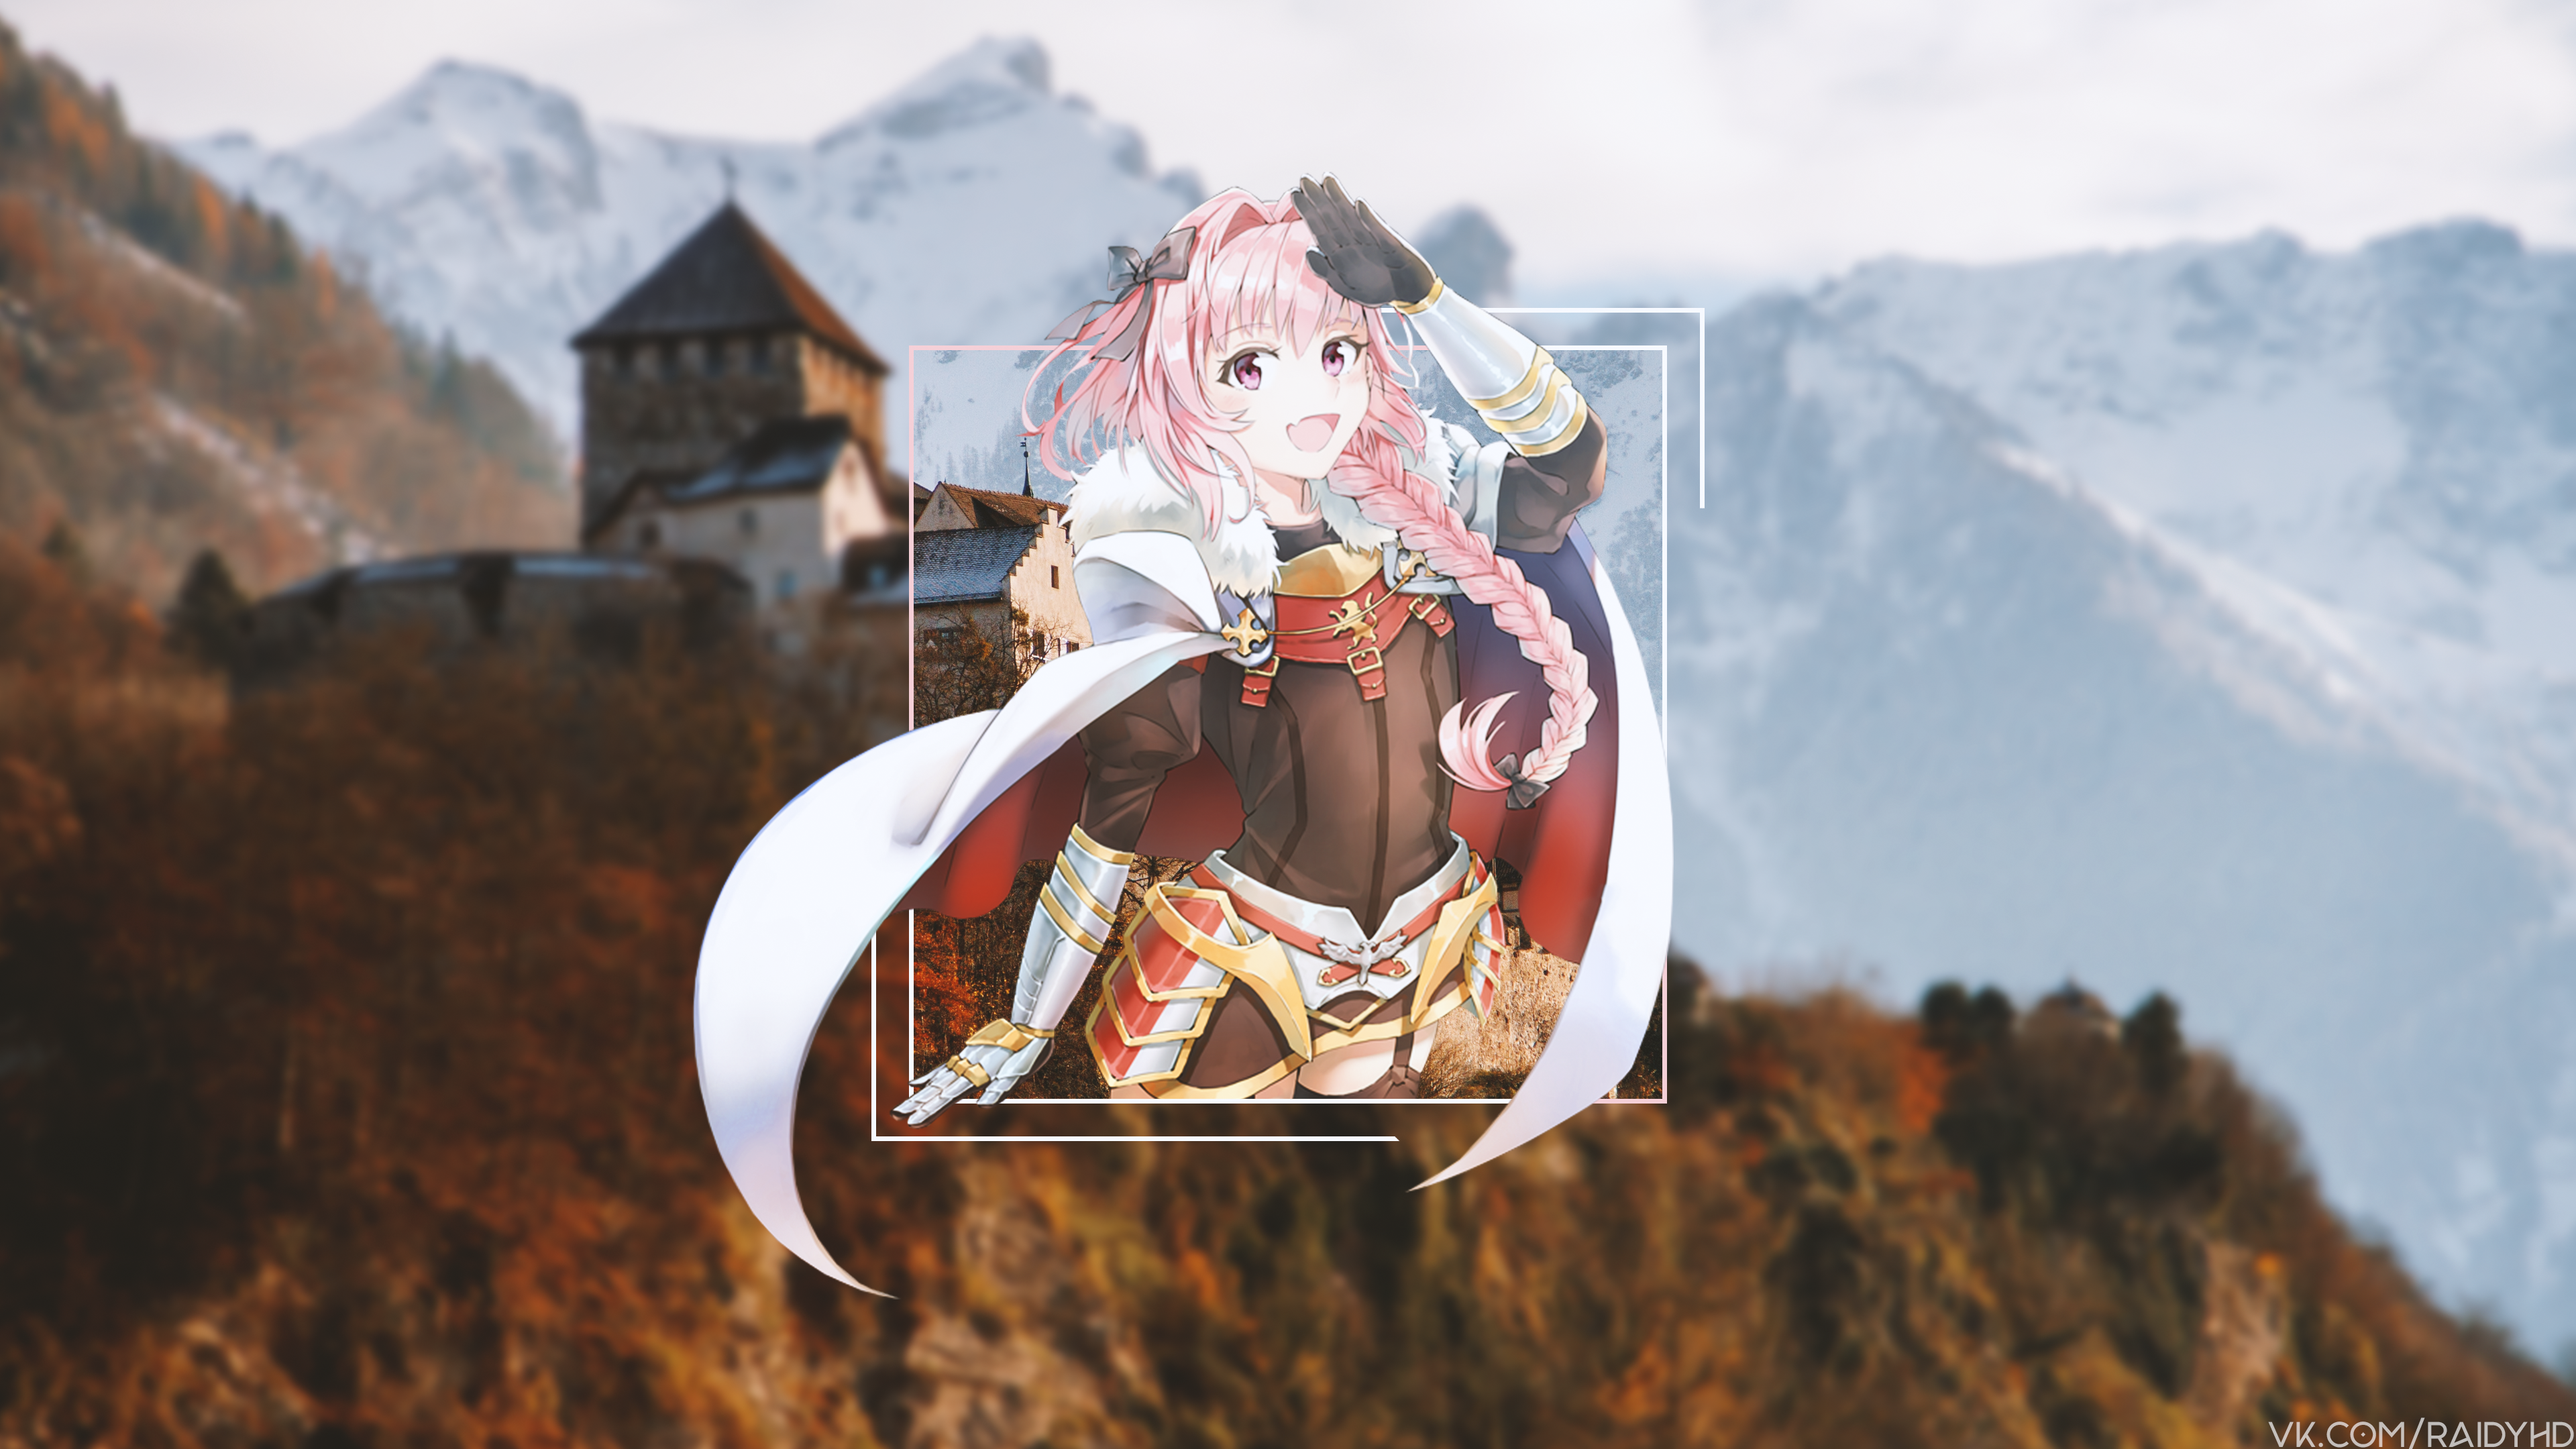 Anime Anime Girls Picture In Picture Astolfo Fate Apocrypha Astolfo Astolfo Fate Grand Order Fate Gr 3840x2160